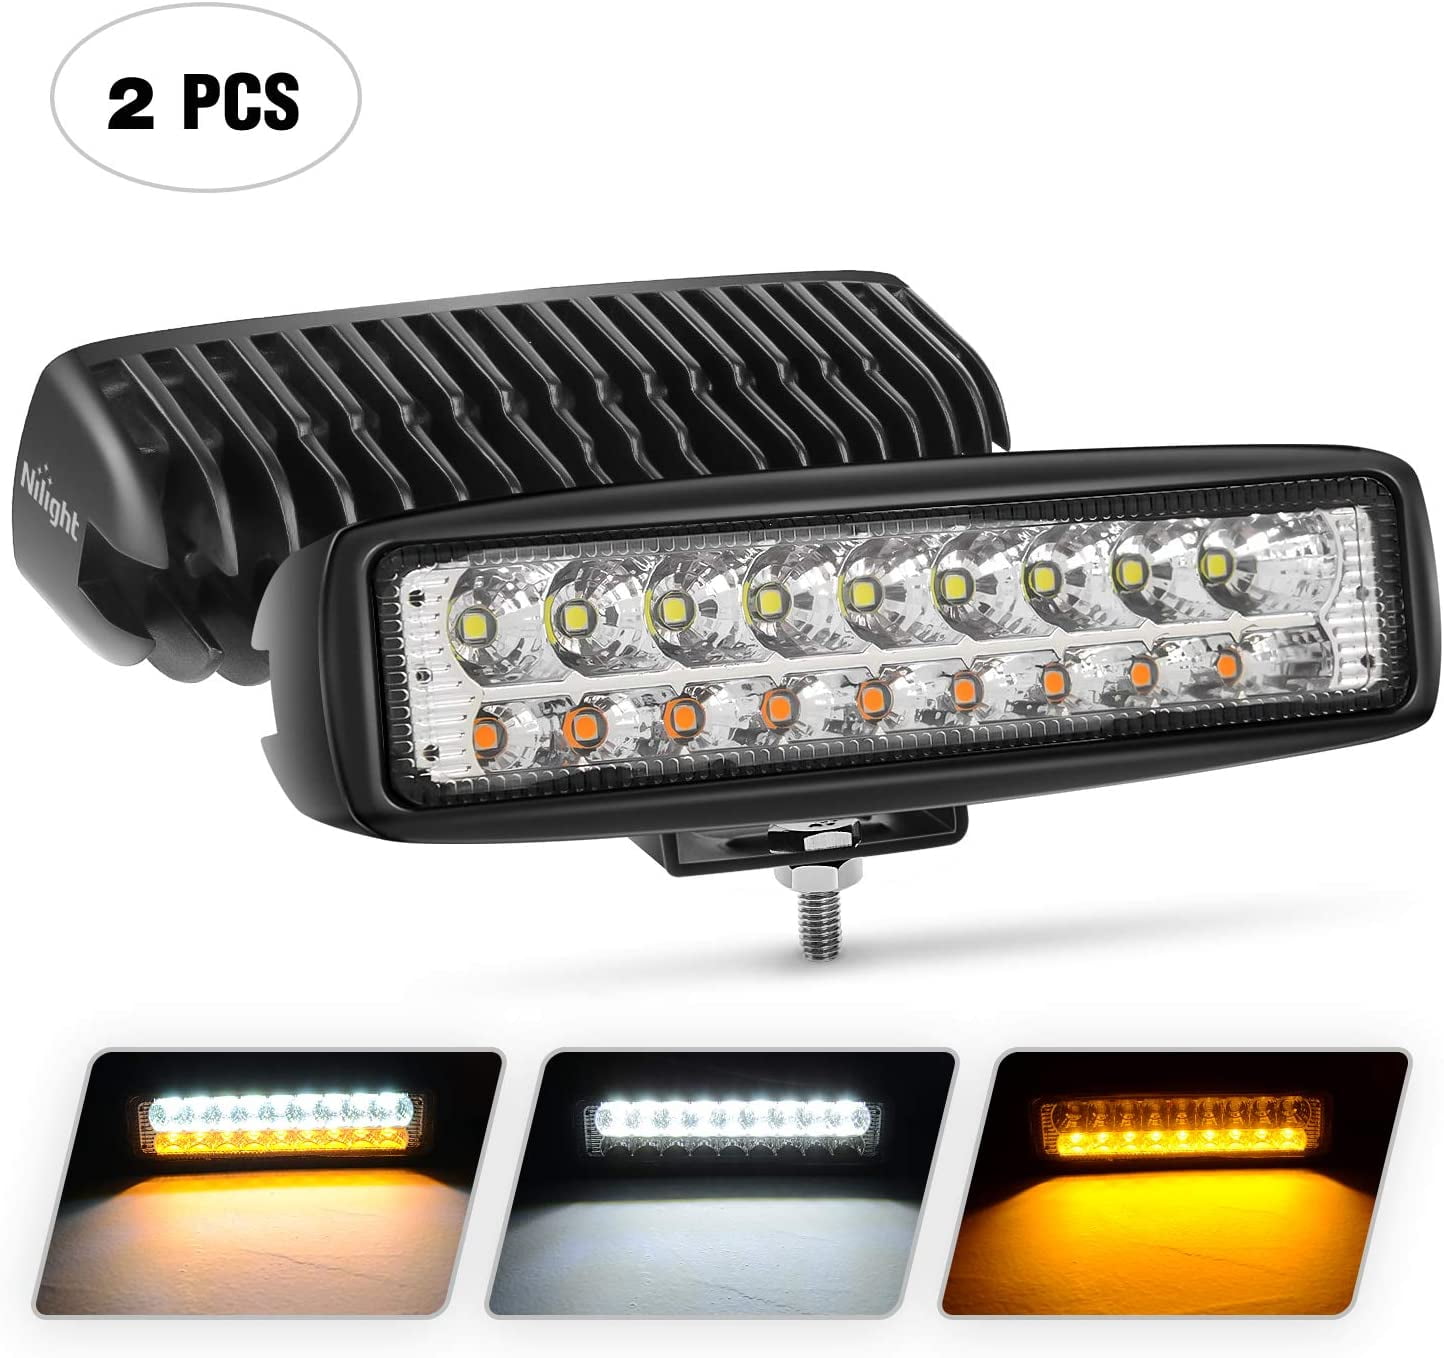 Dual Color White &Amber LED Light Work Bar Lamp Driving Fog Offroad SUV 4WD ATV